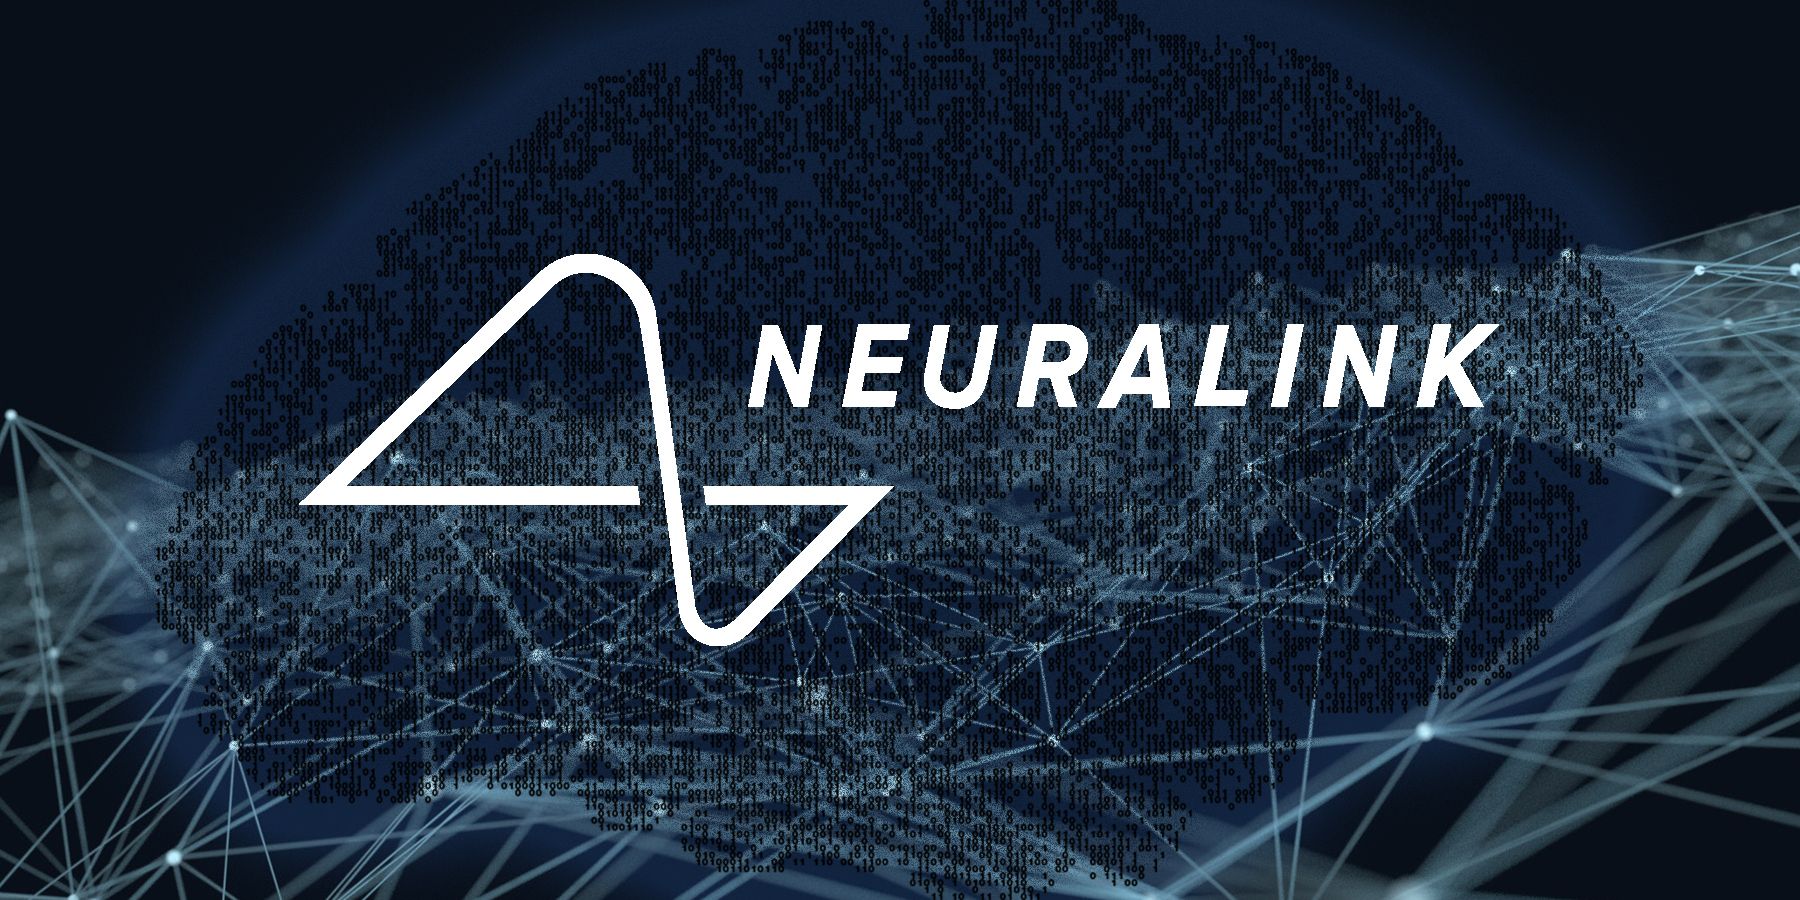 FDA Approves Neuralink for Human Trials - The Standpoint News